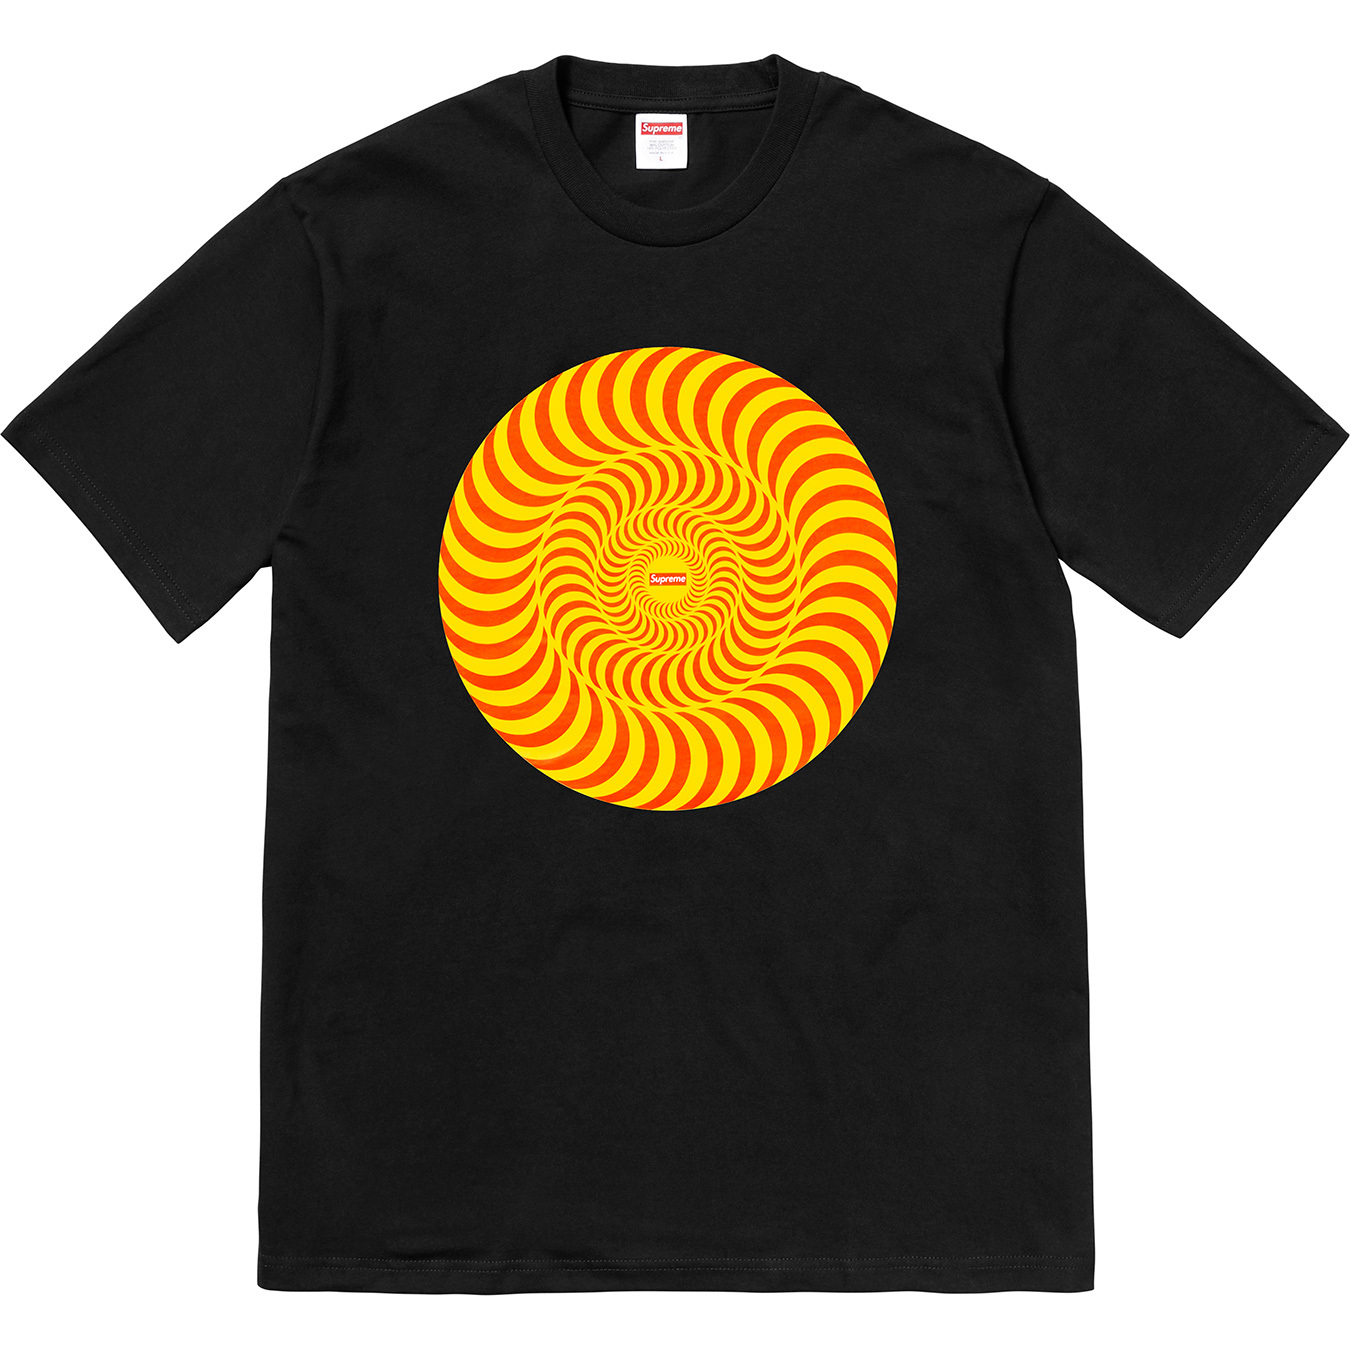 Supreme x Spitfire Wheels Classic Swirl T-Shirt Red Graphic Men's Medium  The End